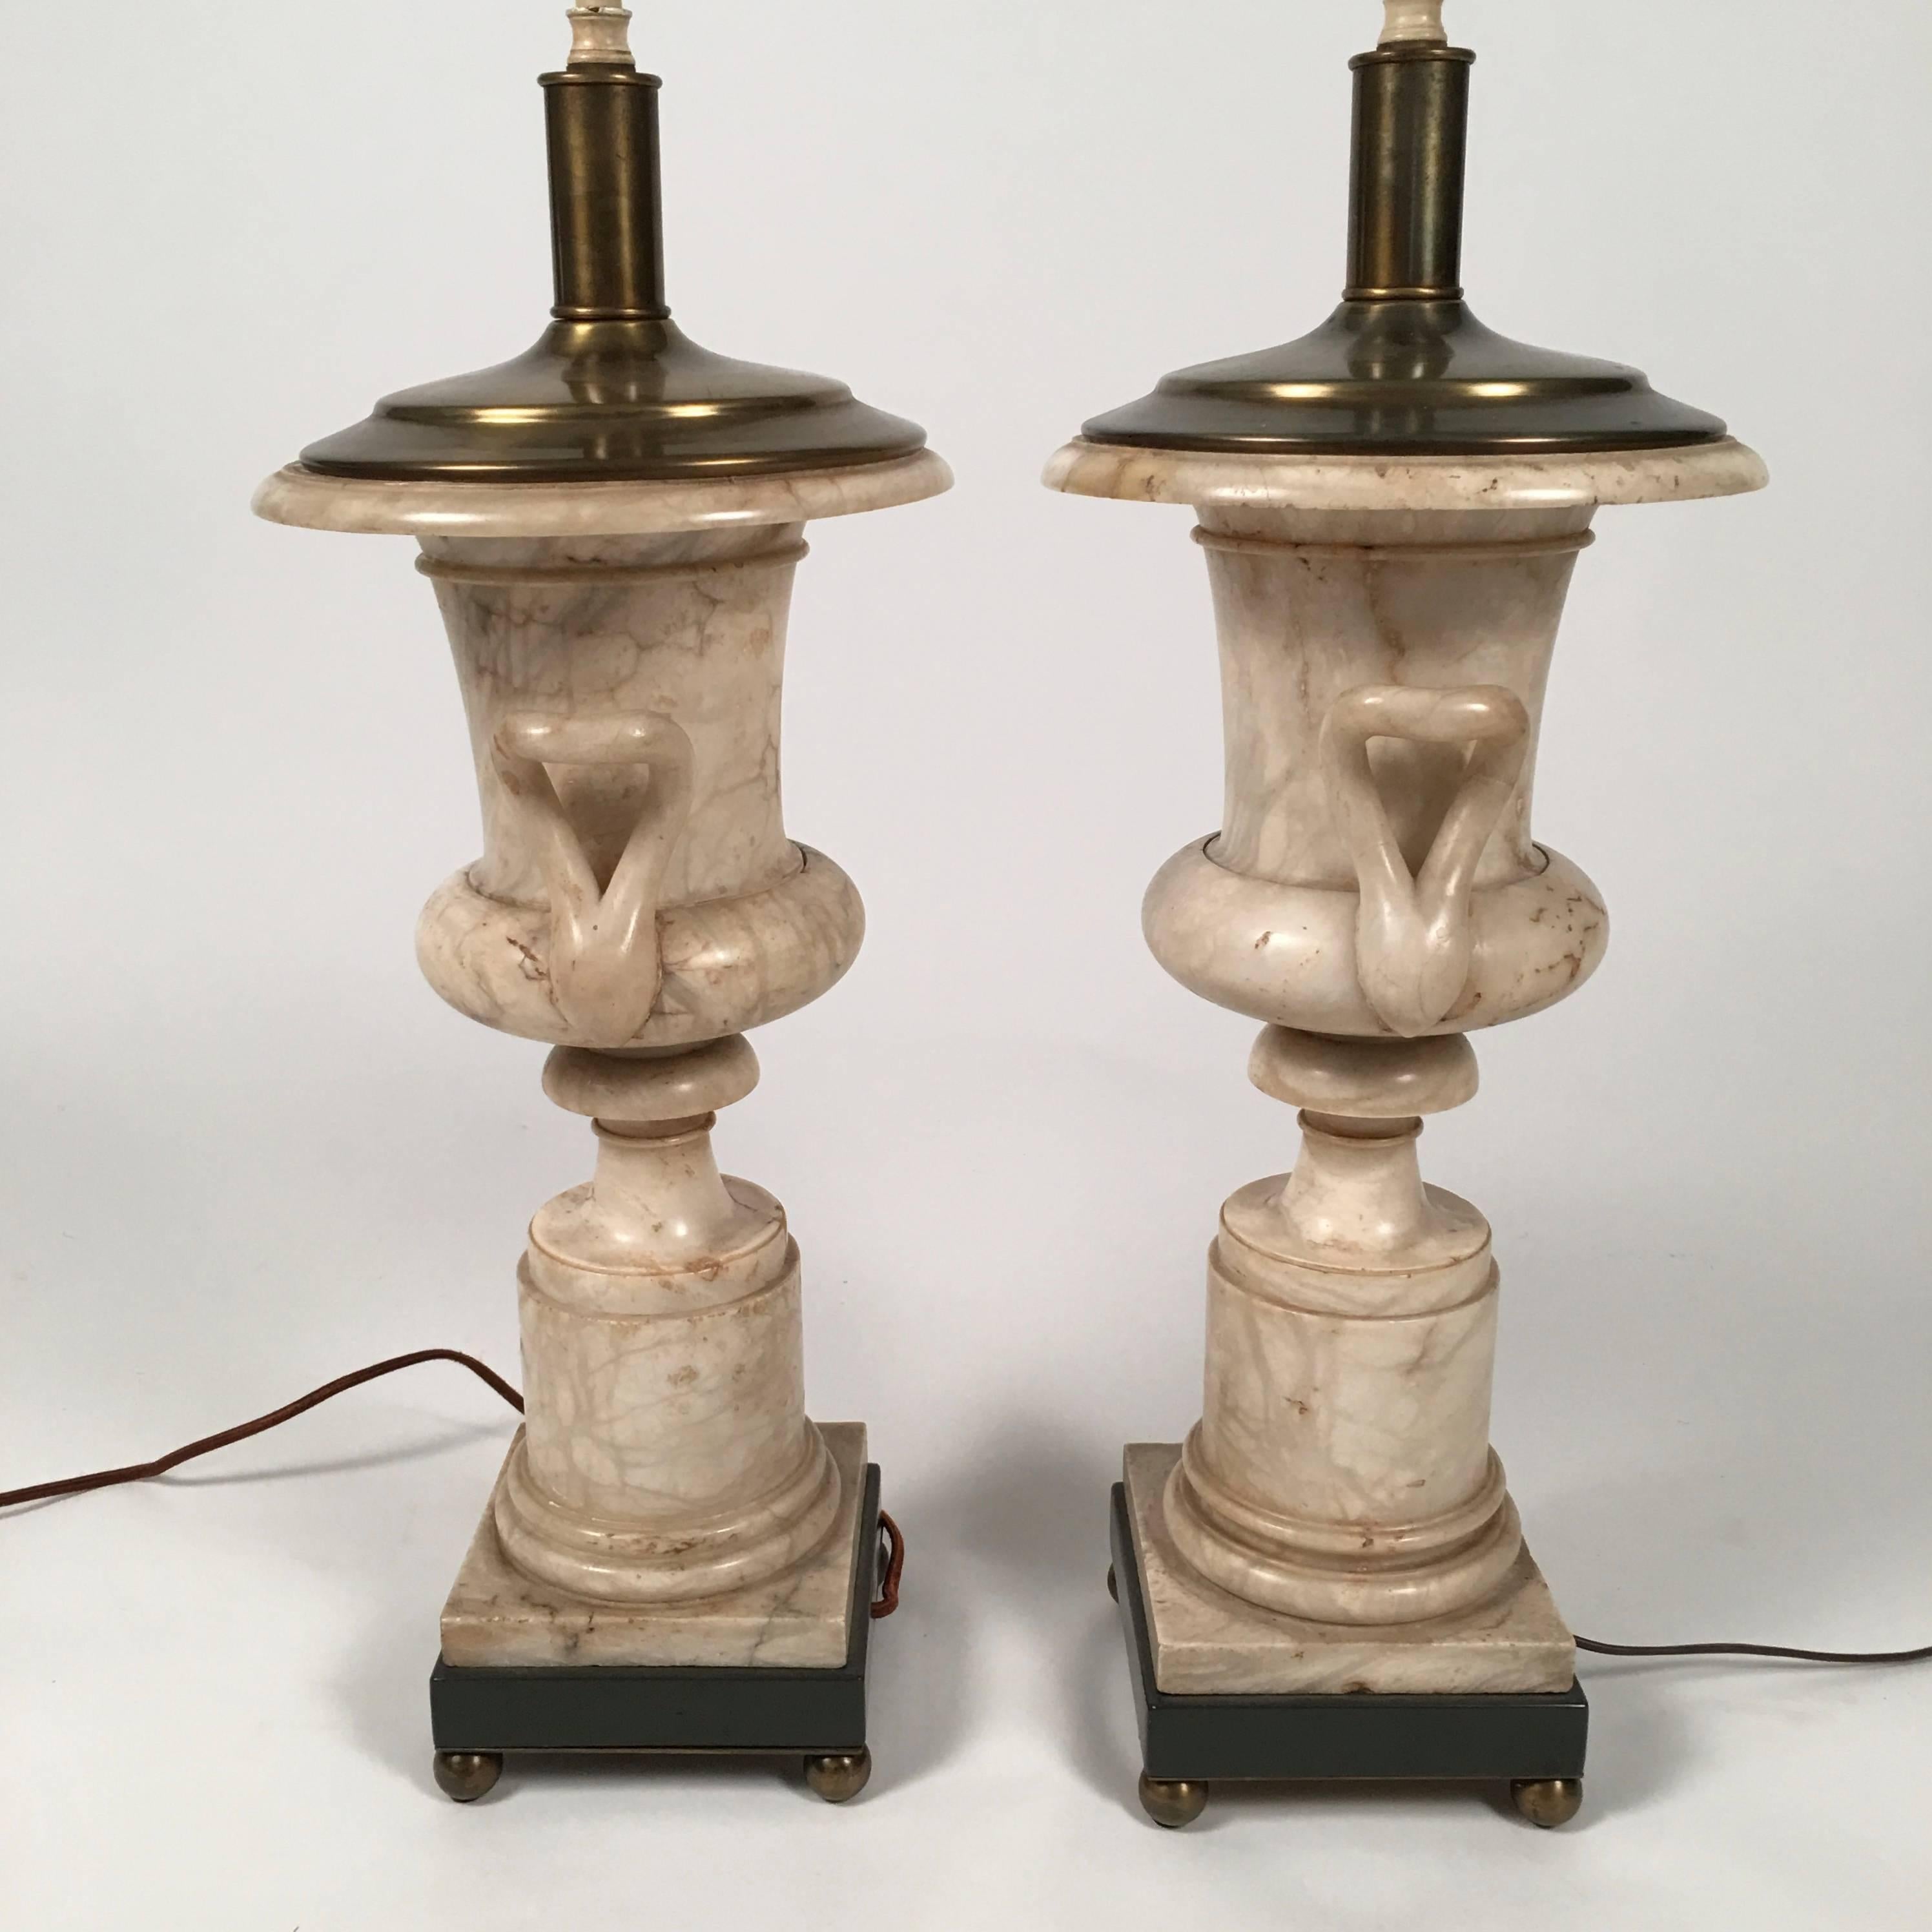 Early 20th Century Pair of Italian Neoclassical Style Alabaster Urn Lamps